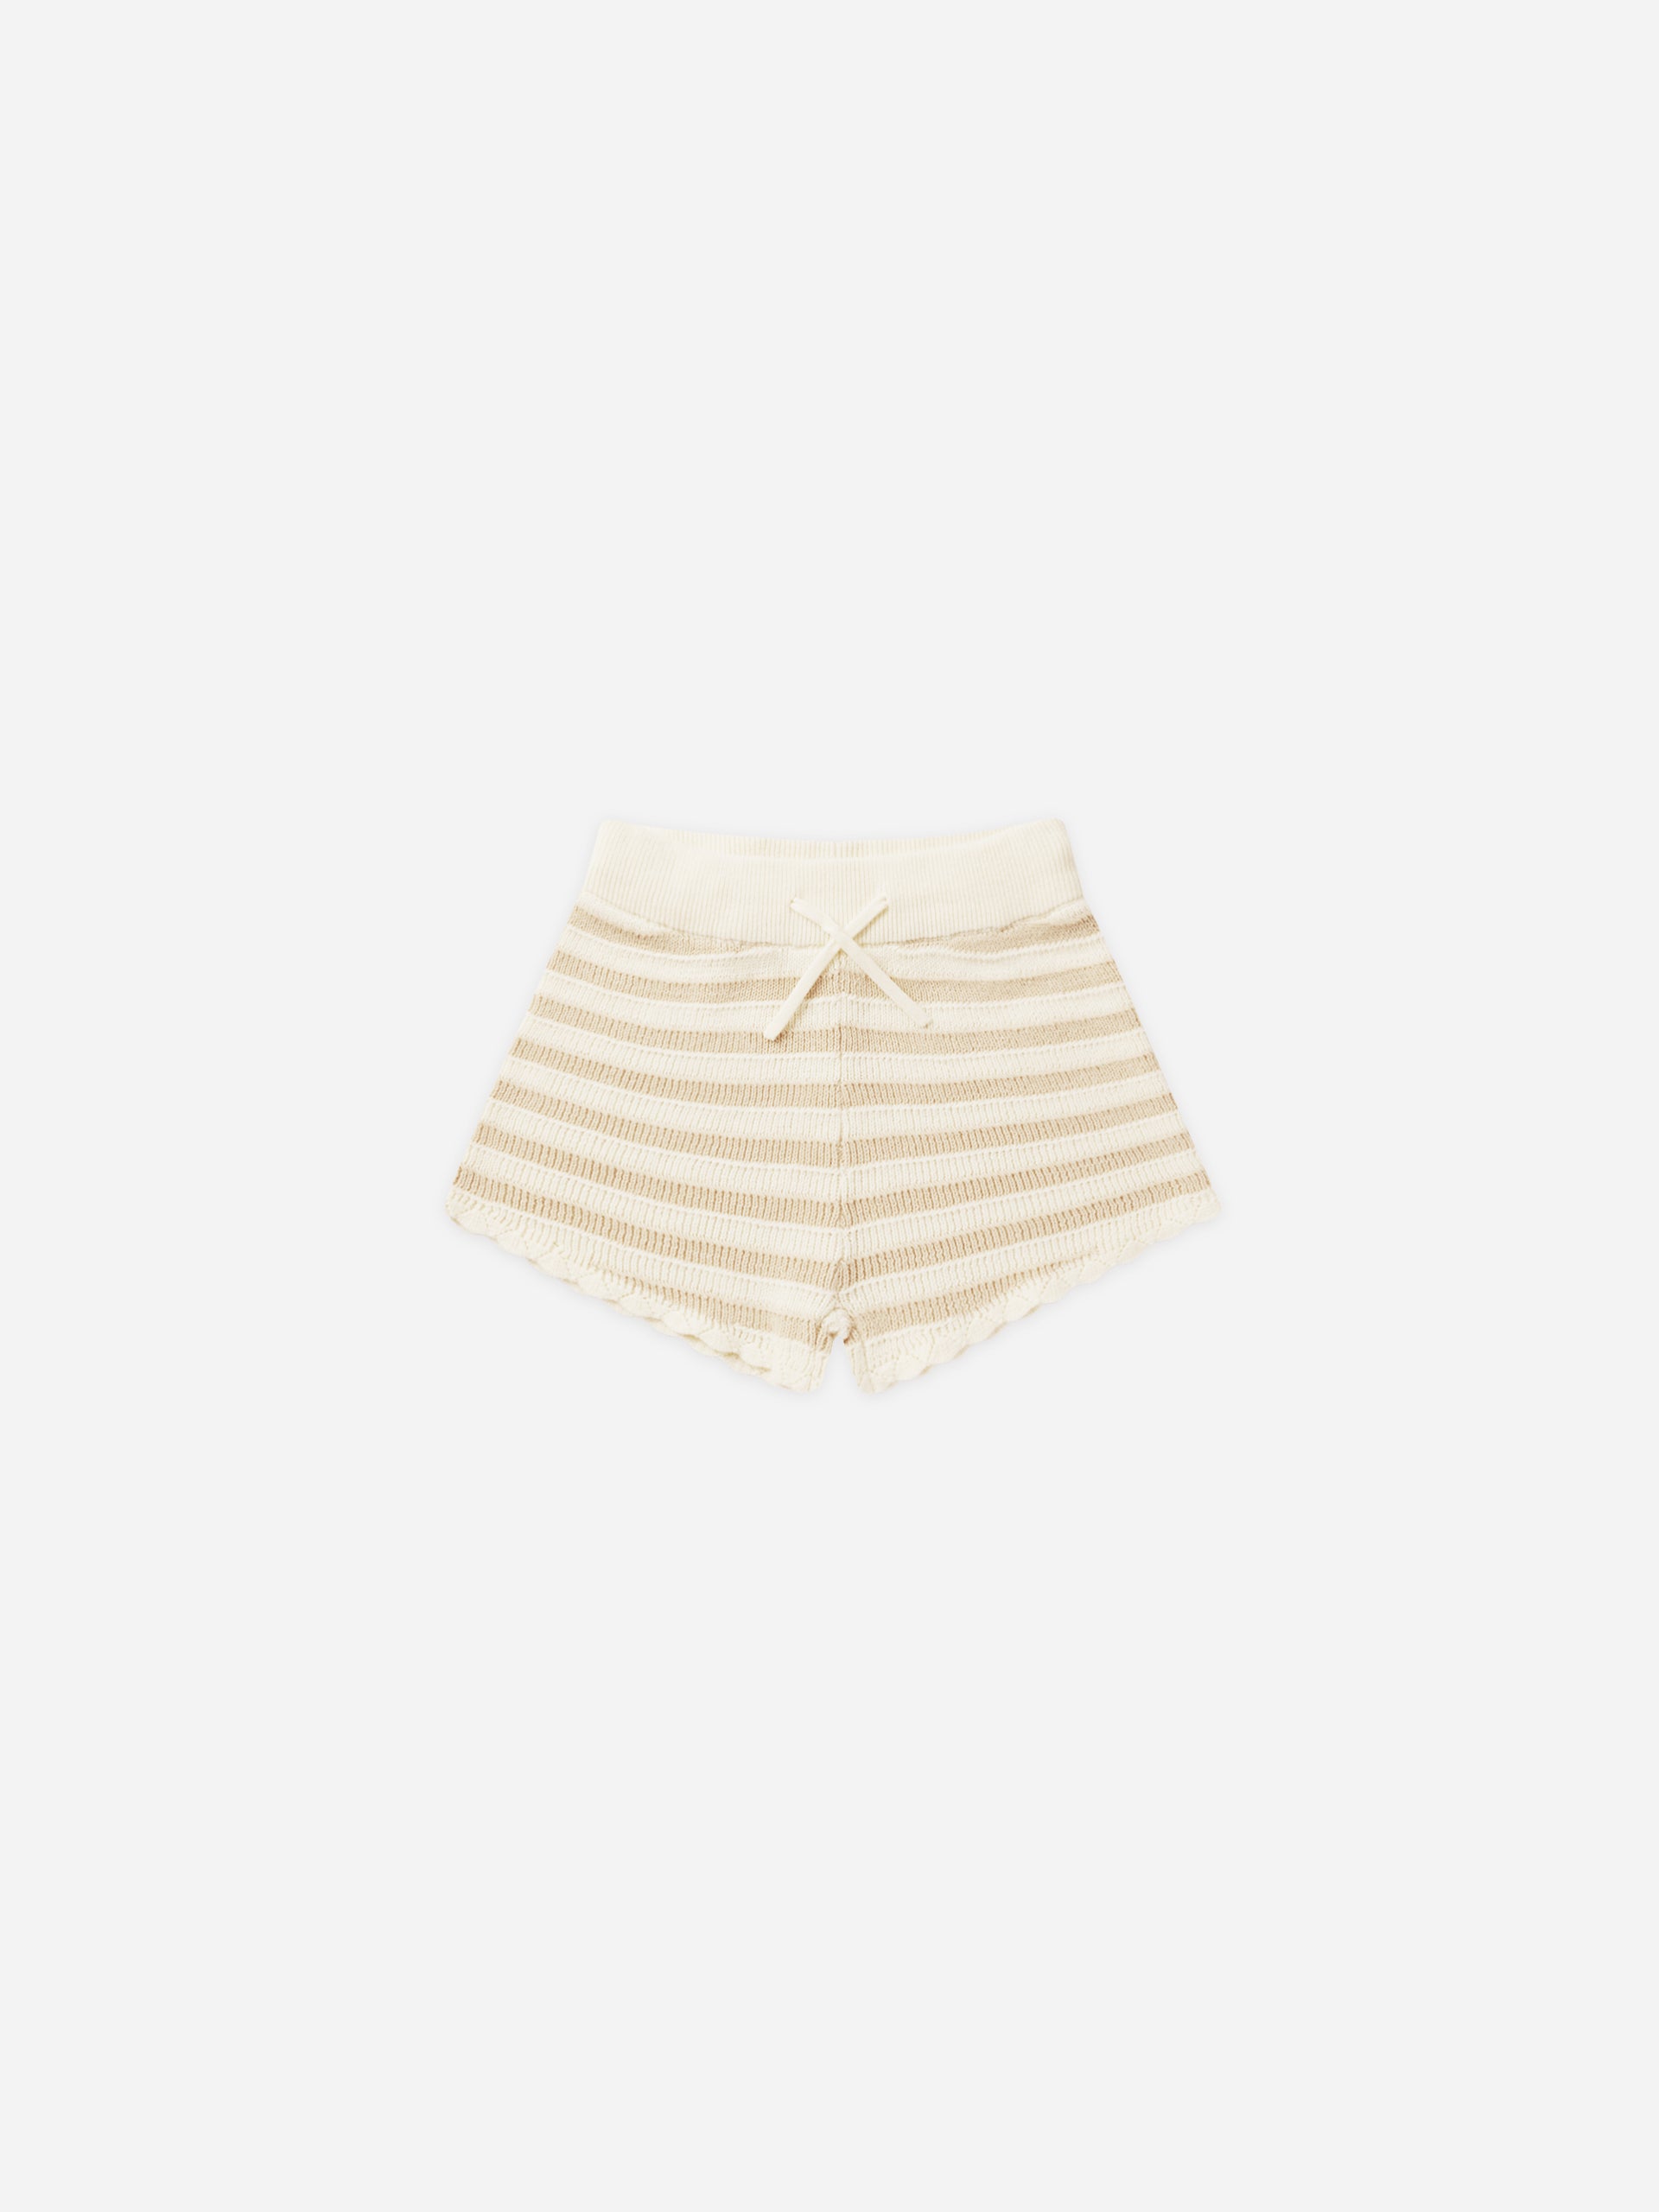 Knit Shorts || Sand Stripe - Rylee + Cru | Kids Clothes | Trendy Baby Clothes | Modern Infant Outfits |